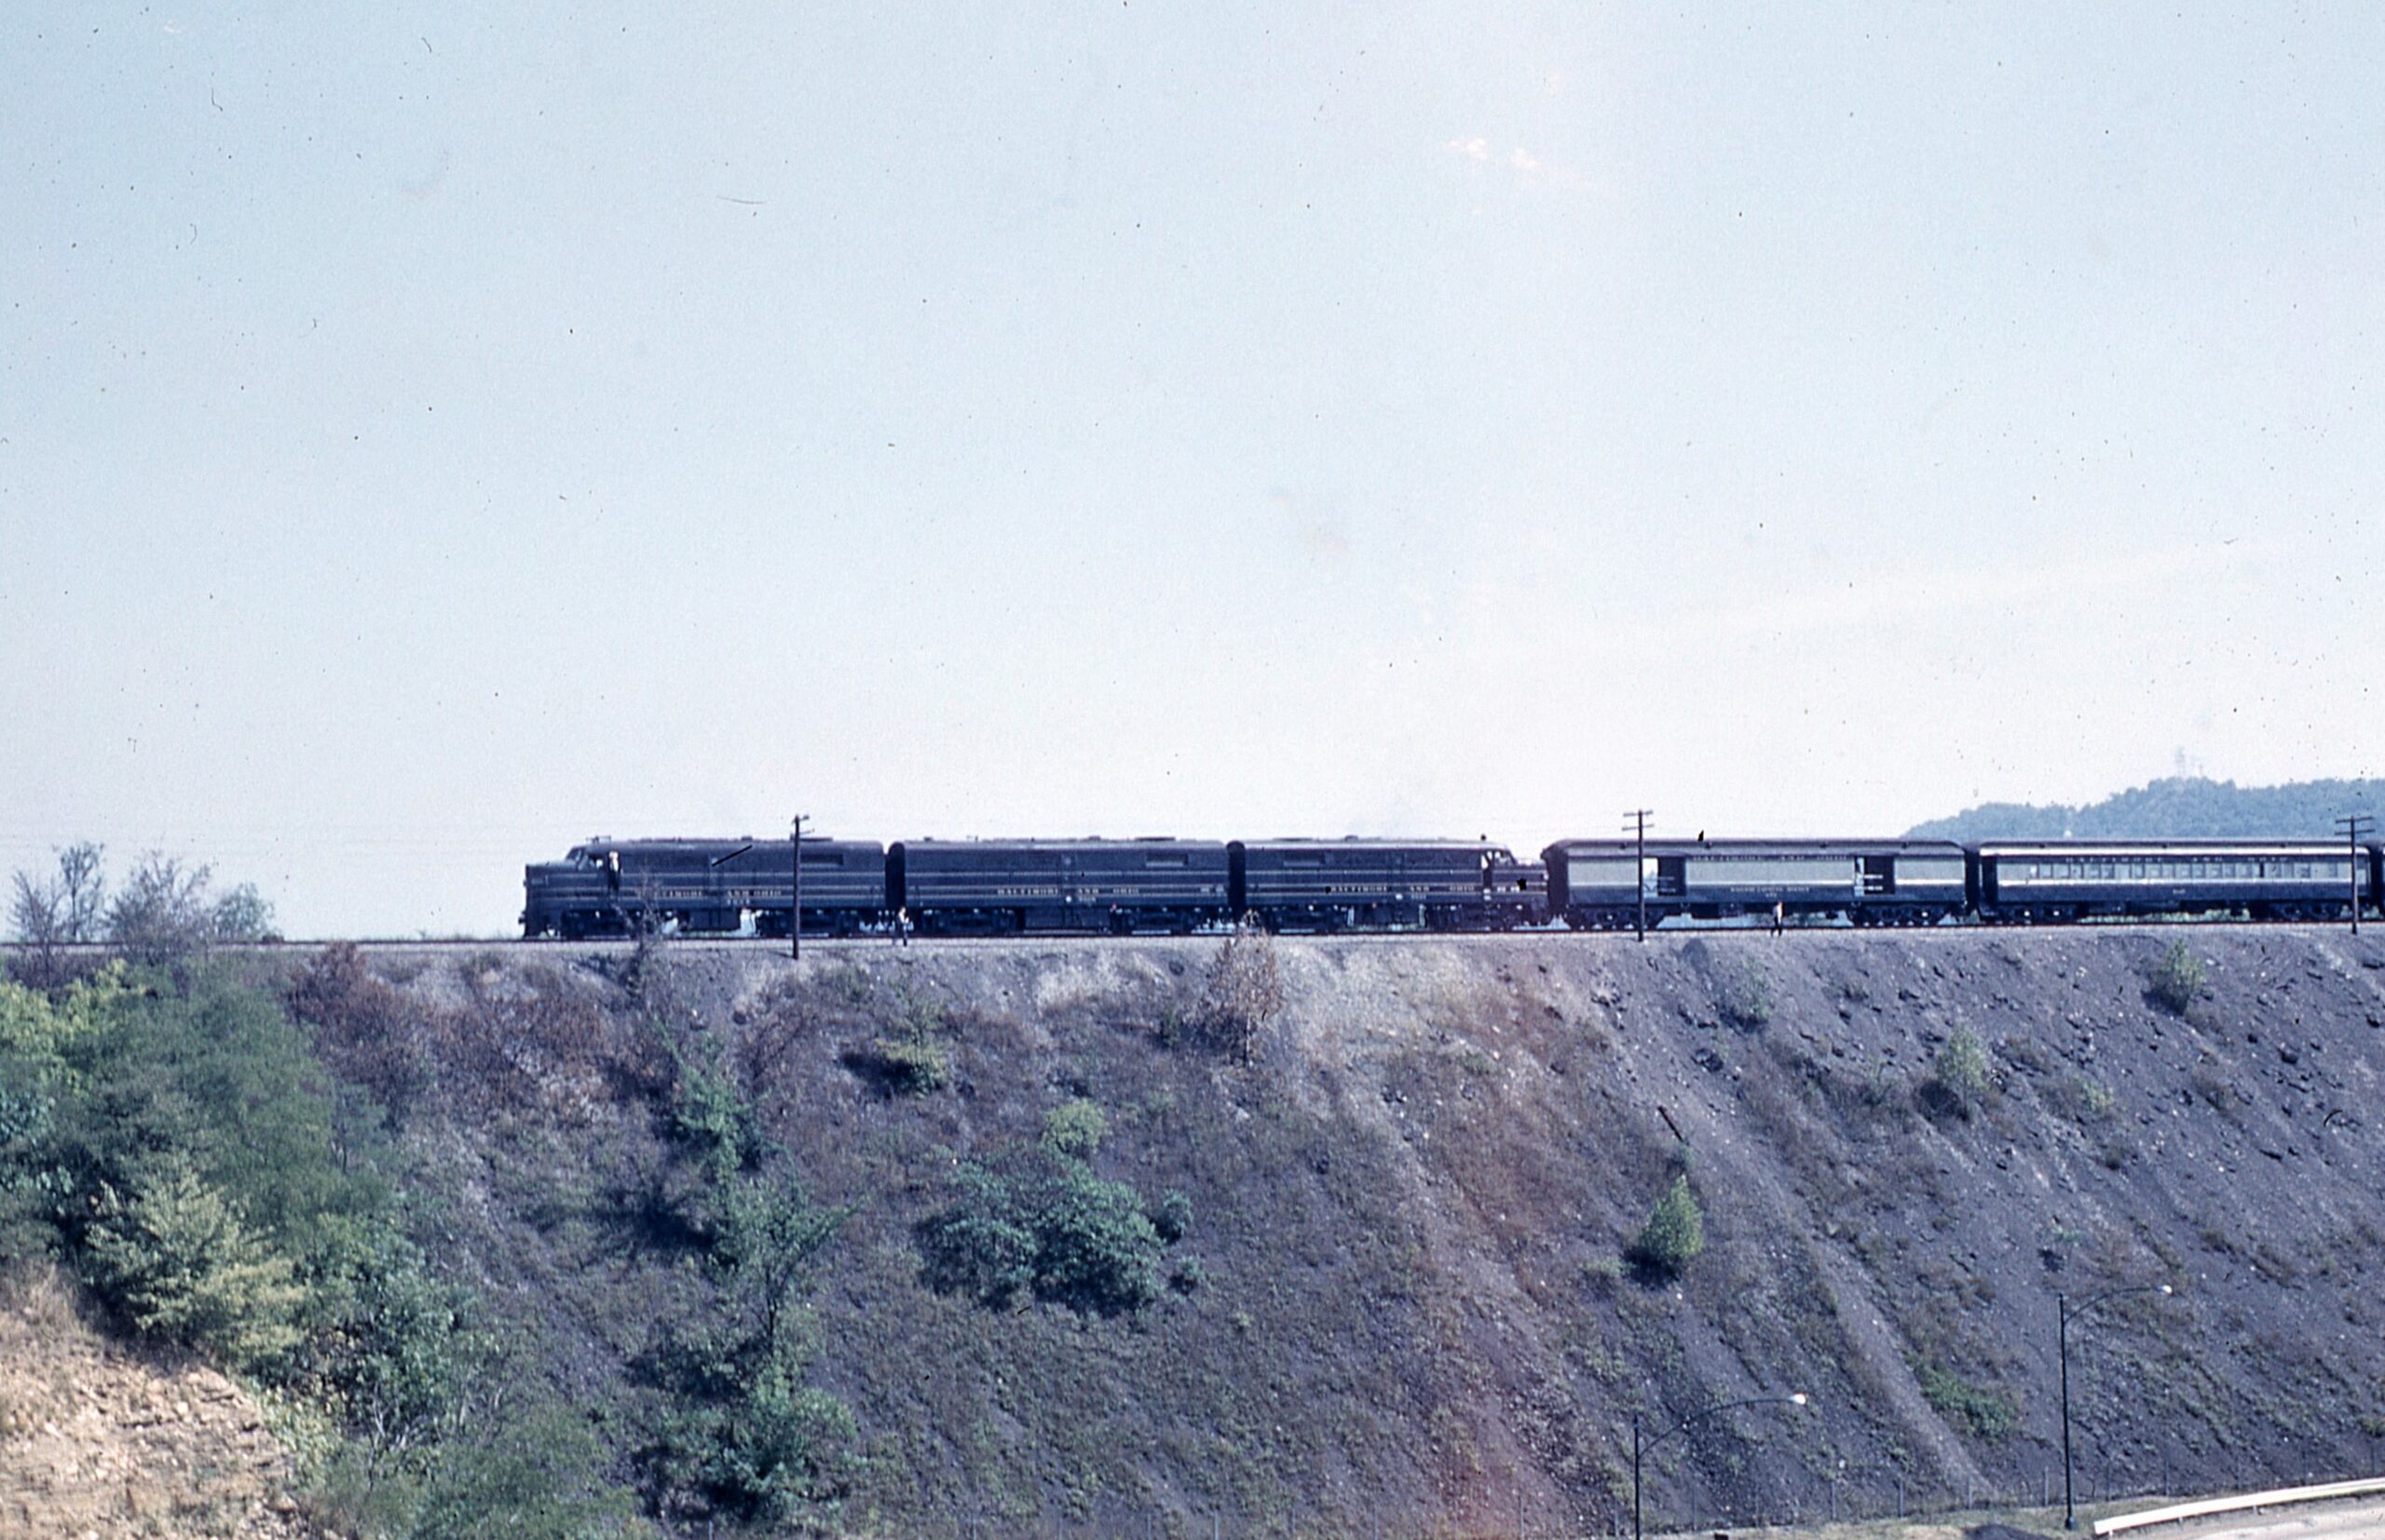 Baltimore and Ohio | Harmor Township, Pennsylvania | Alco FABA diesel-electric locomotives | 1959 NRHS Convention Excursion on B&LE | September 5, 1959 | NRHS Collection